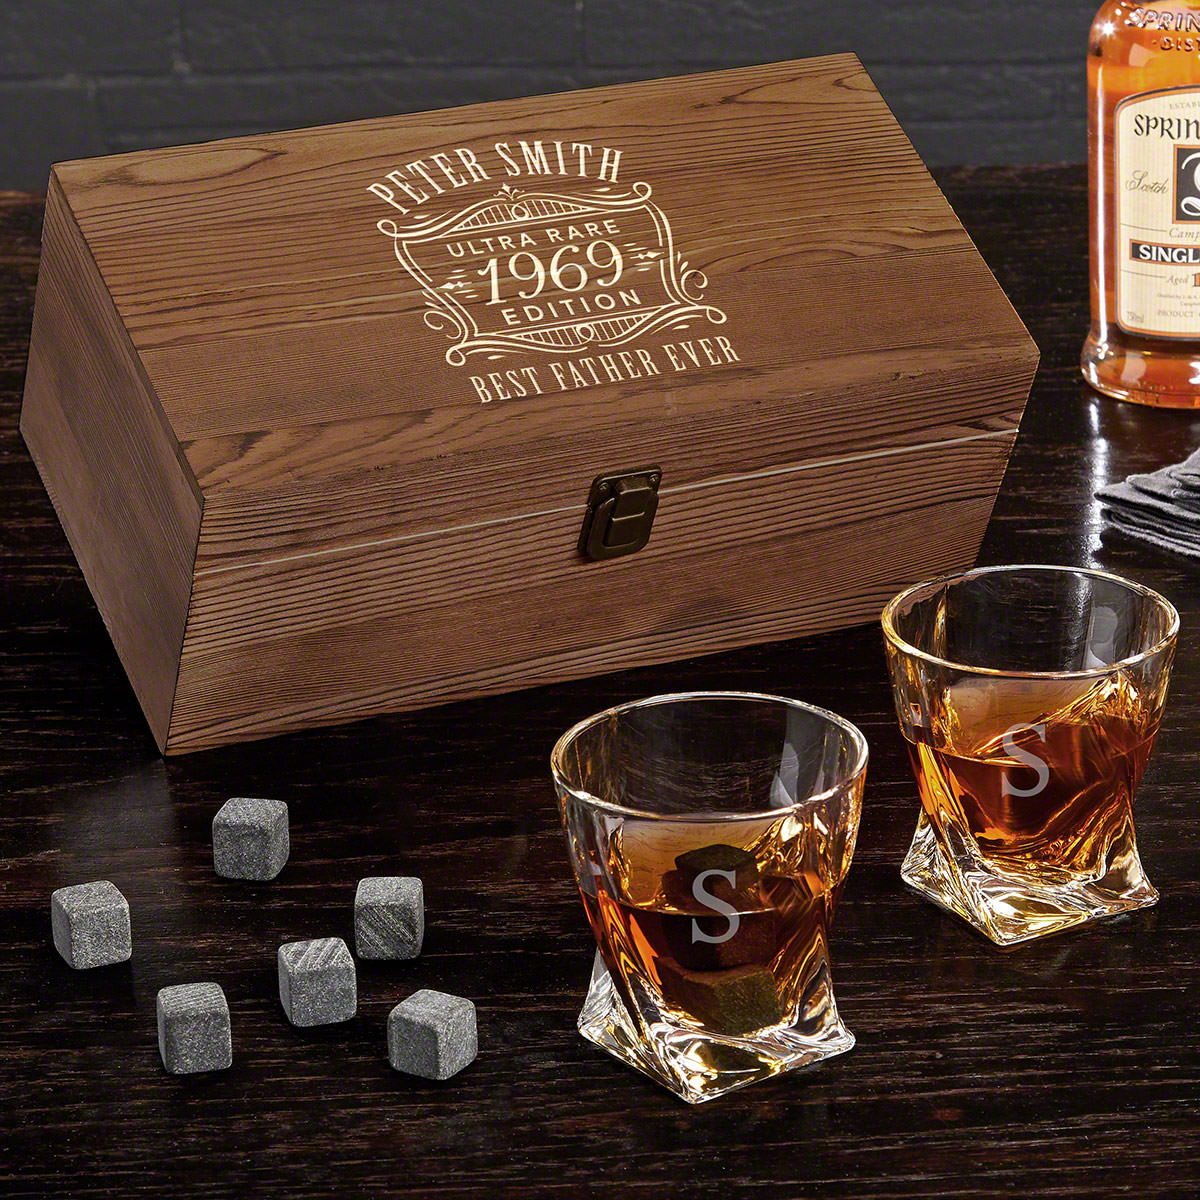 Ultra Rare Edition Personalized Whiskey Gift Box